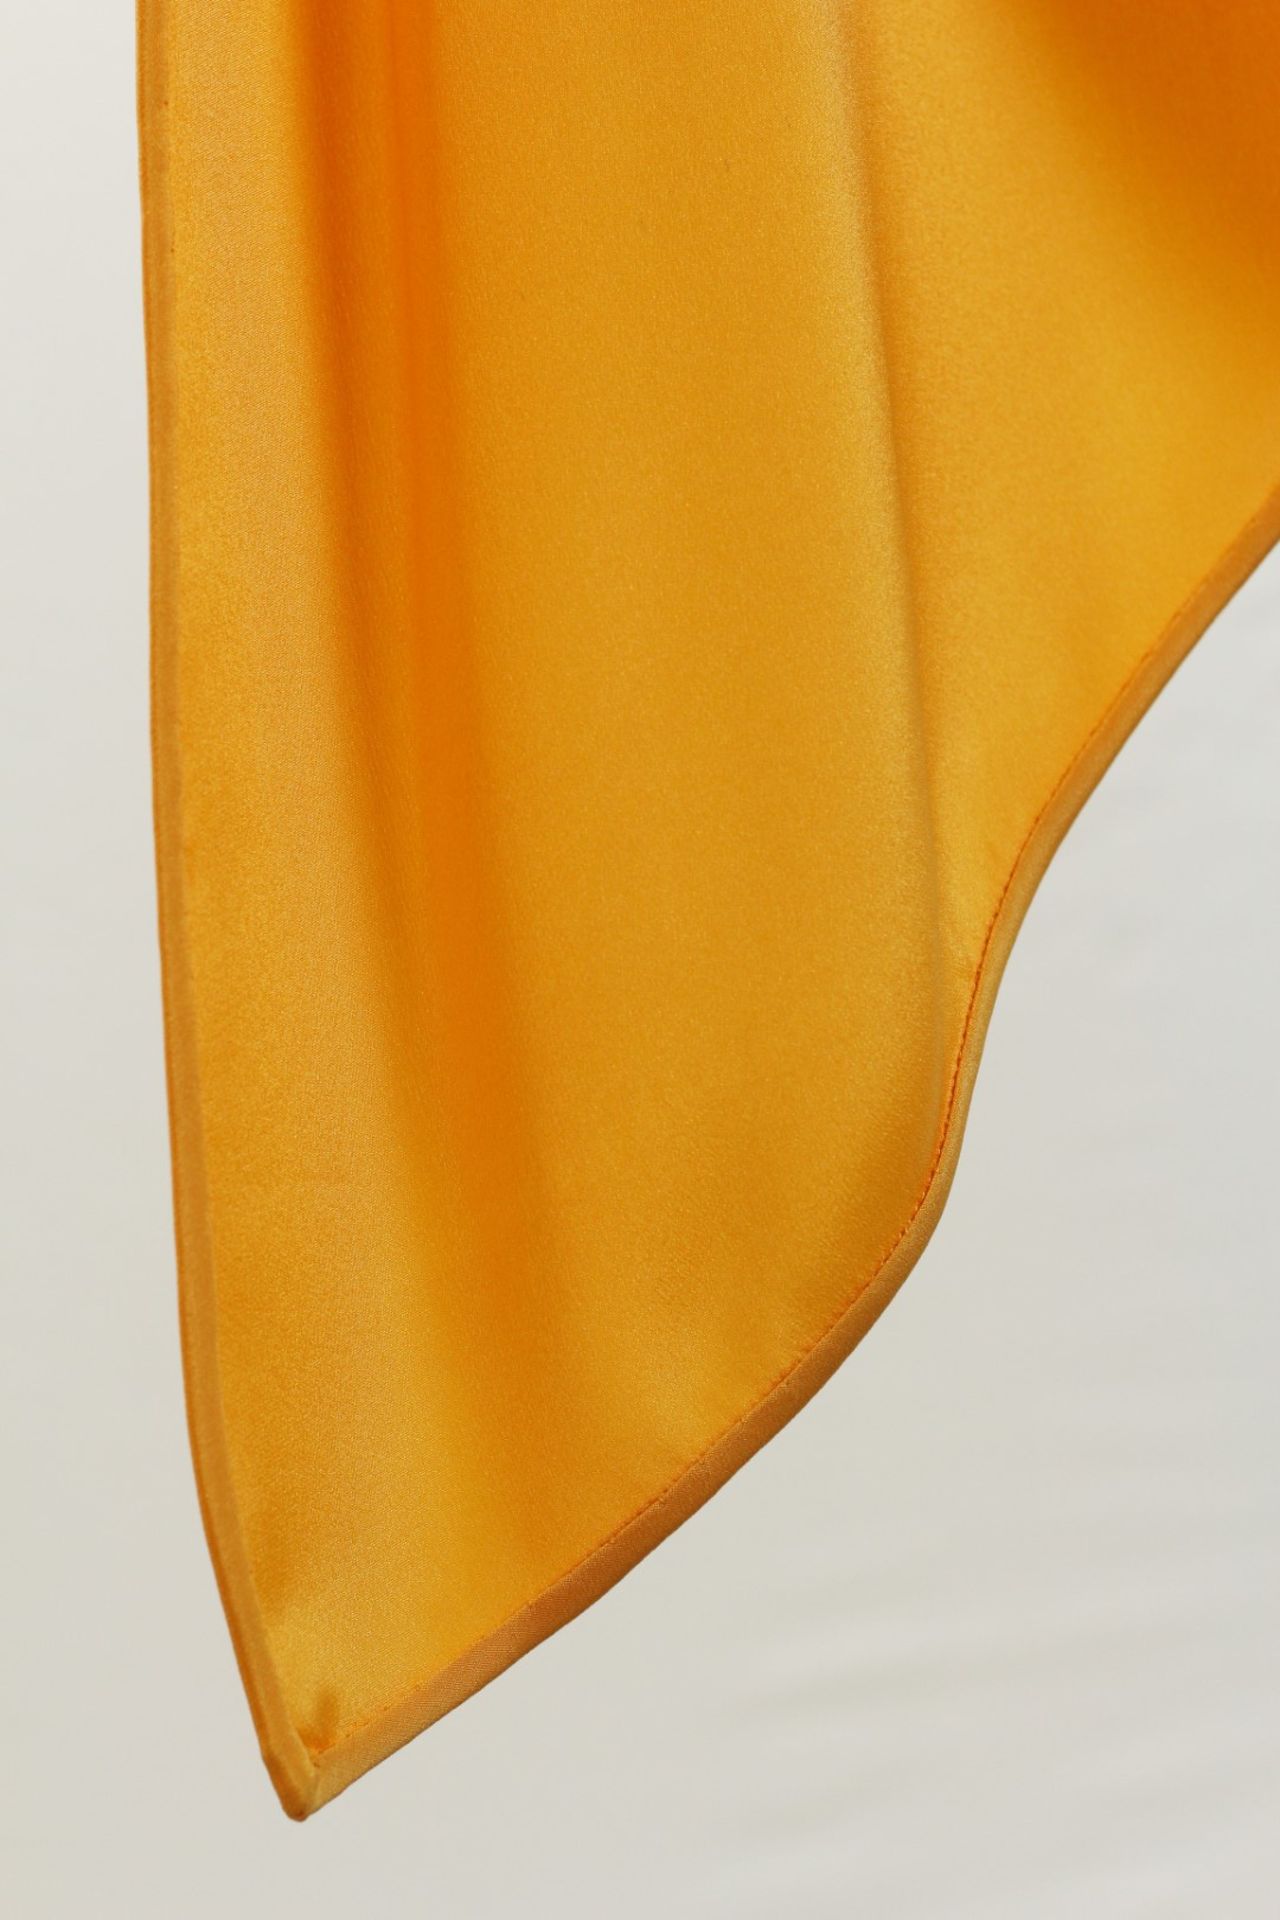 1 x Boutique Le Duc Apricot Wrap/Shawl - From a High End Clothing Boutique In The - Image 7 of 8